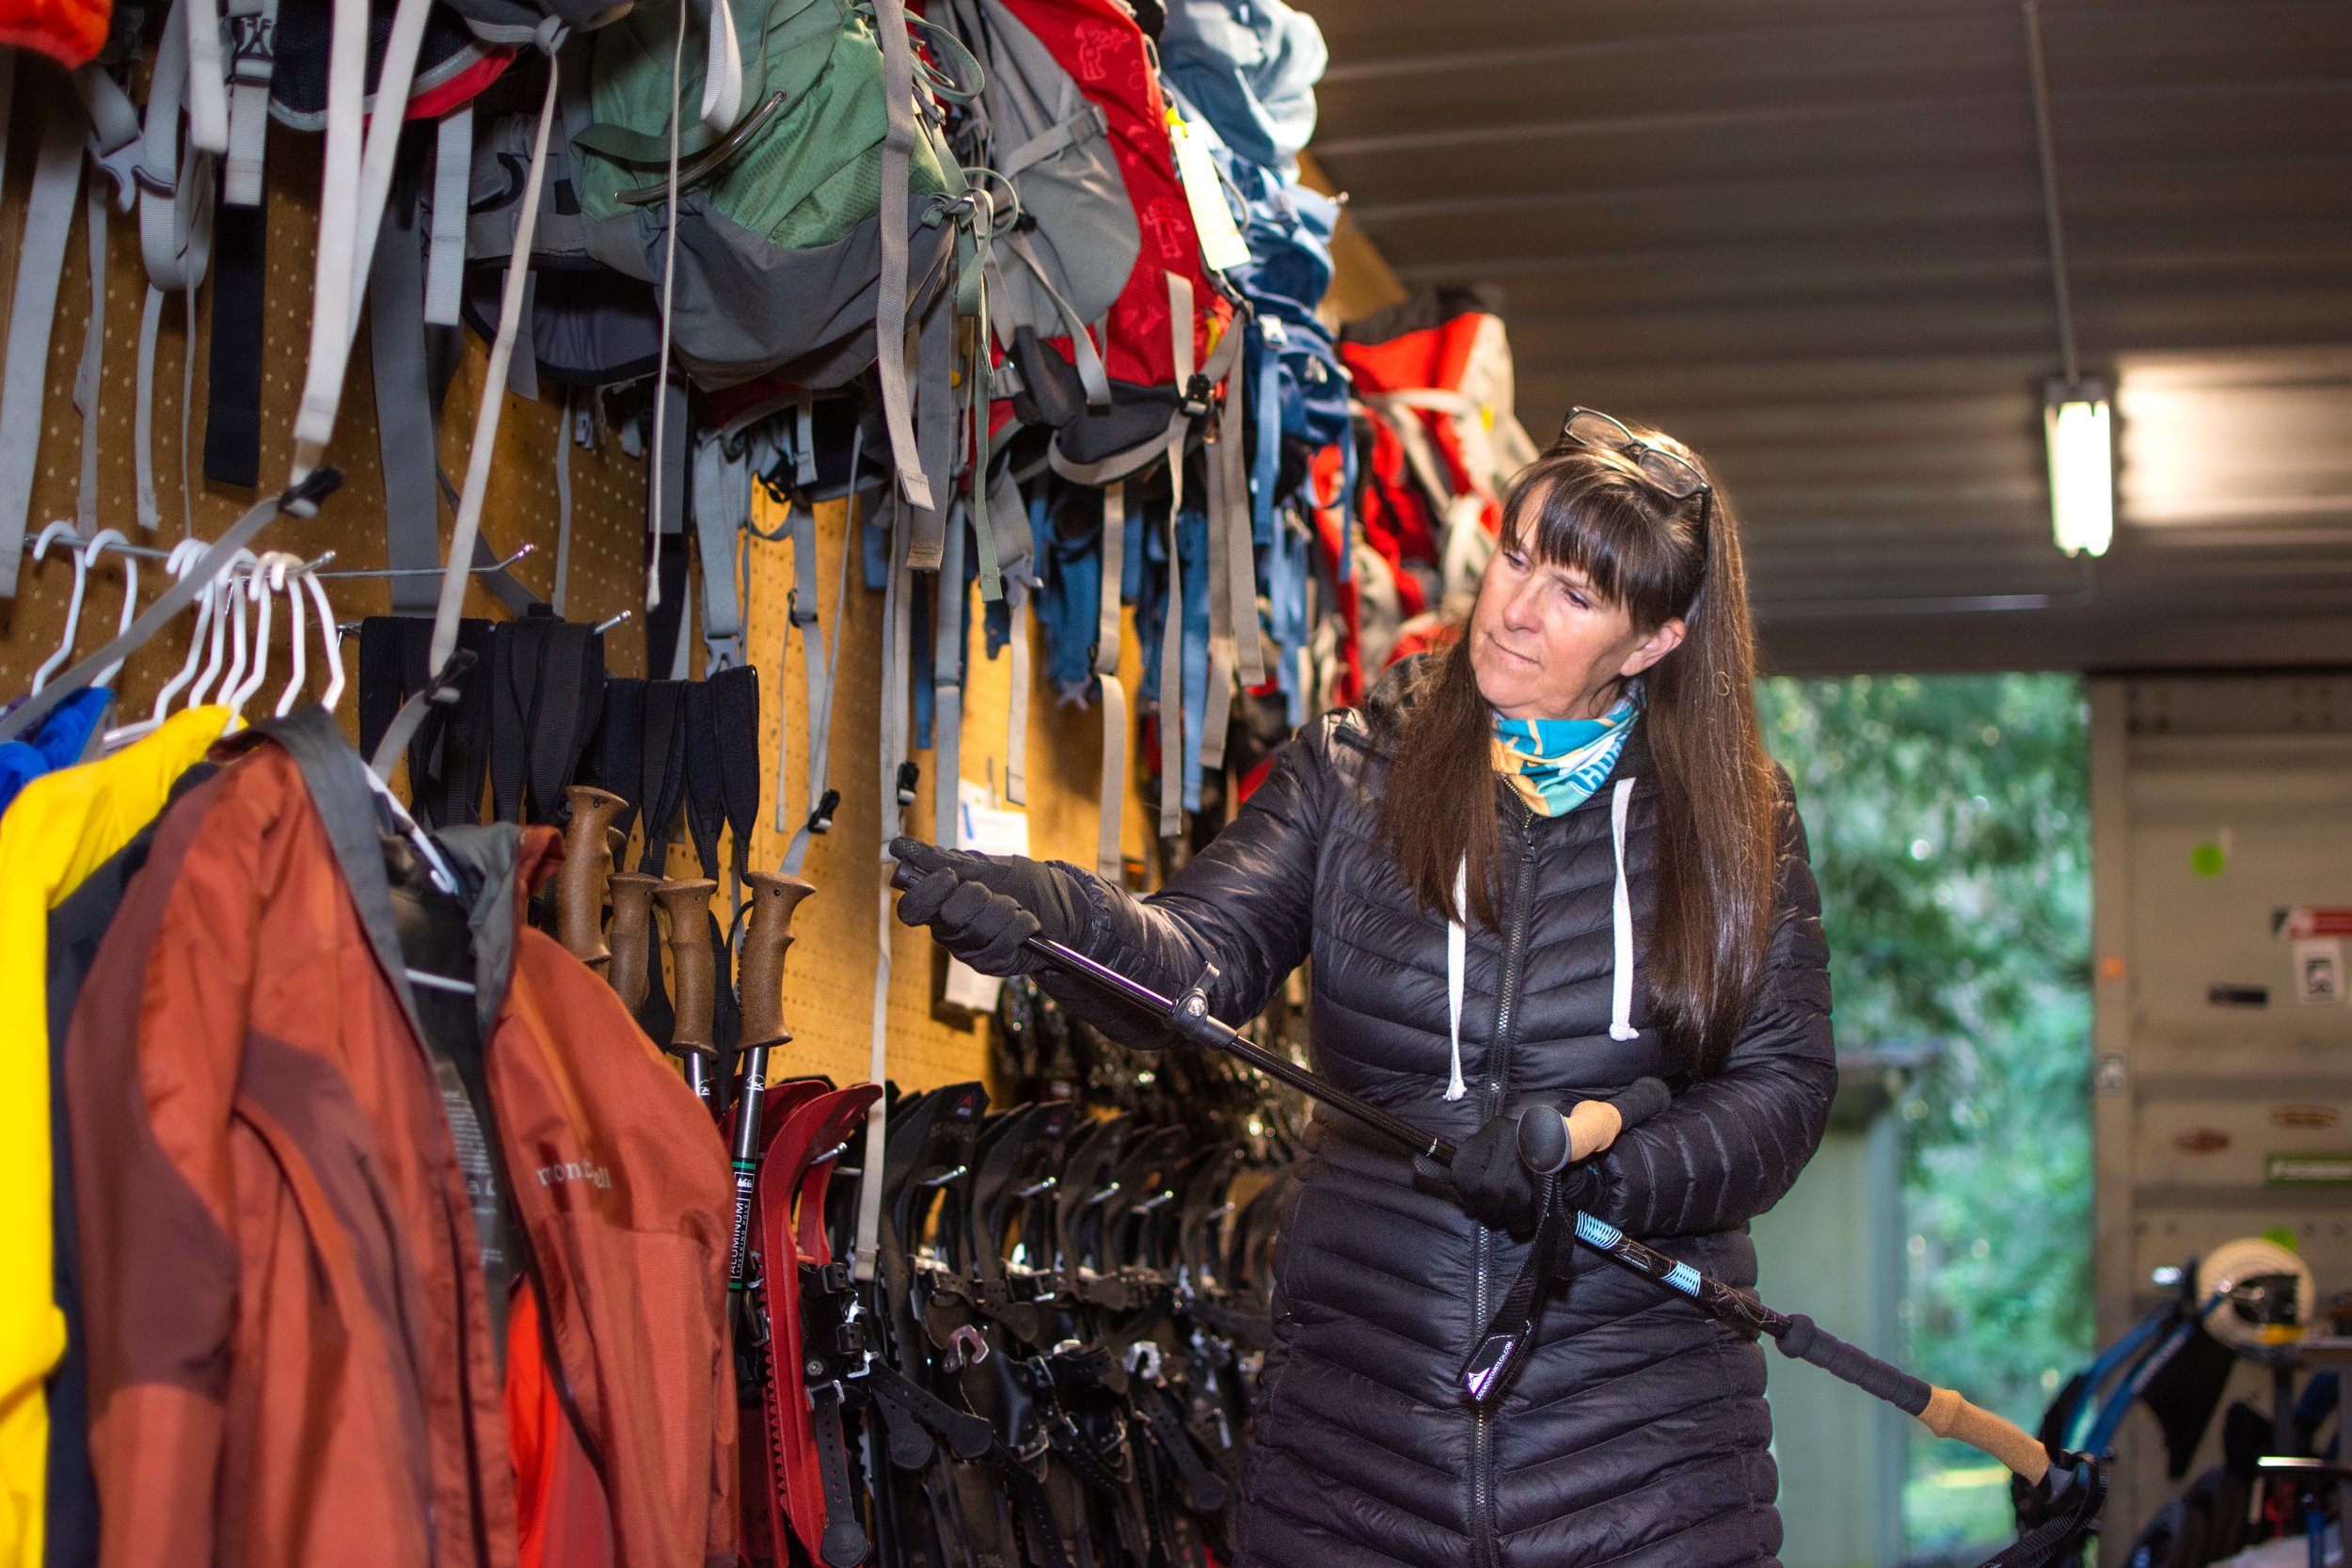 Stacy Stoner works to remove barriers to the great outdoors through the Gearbank.